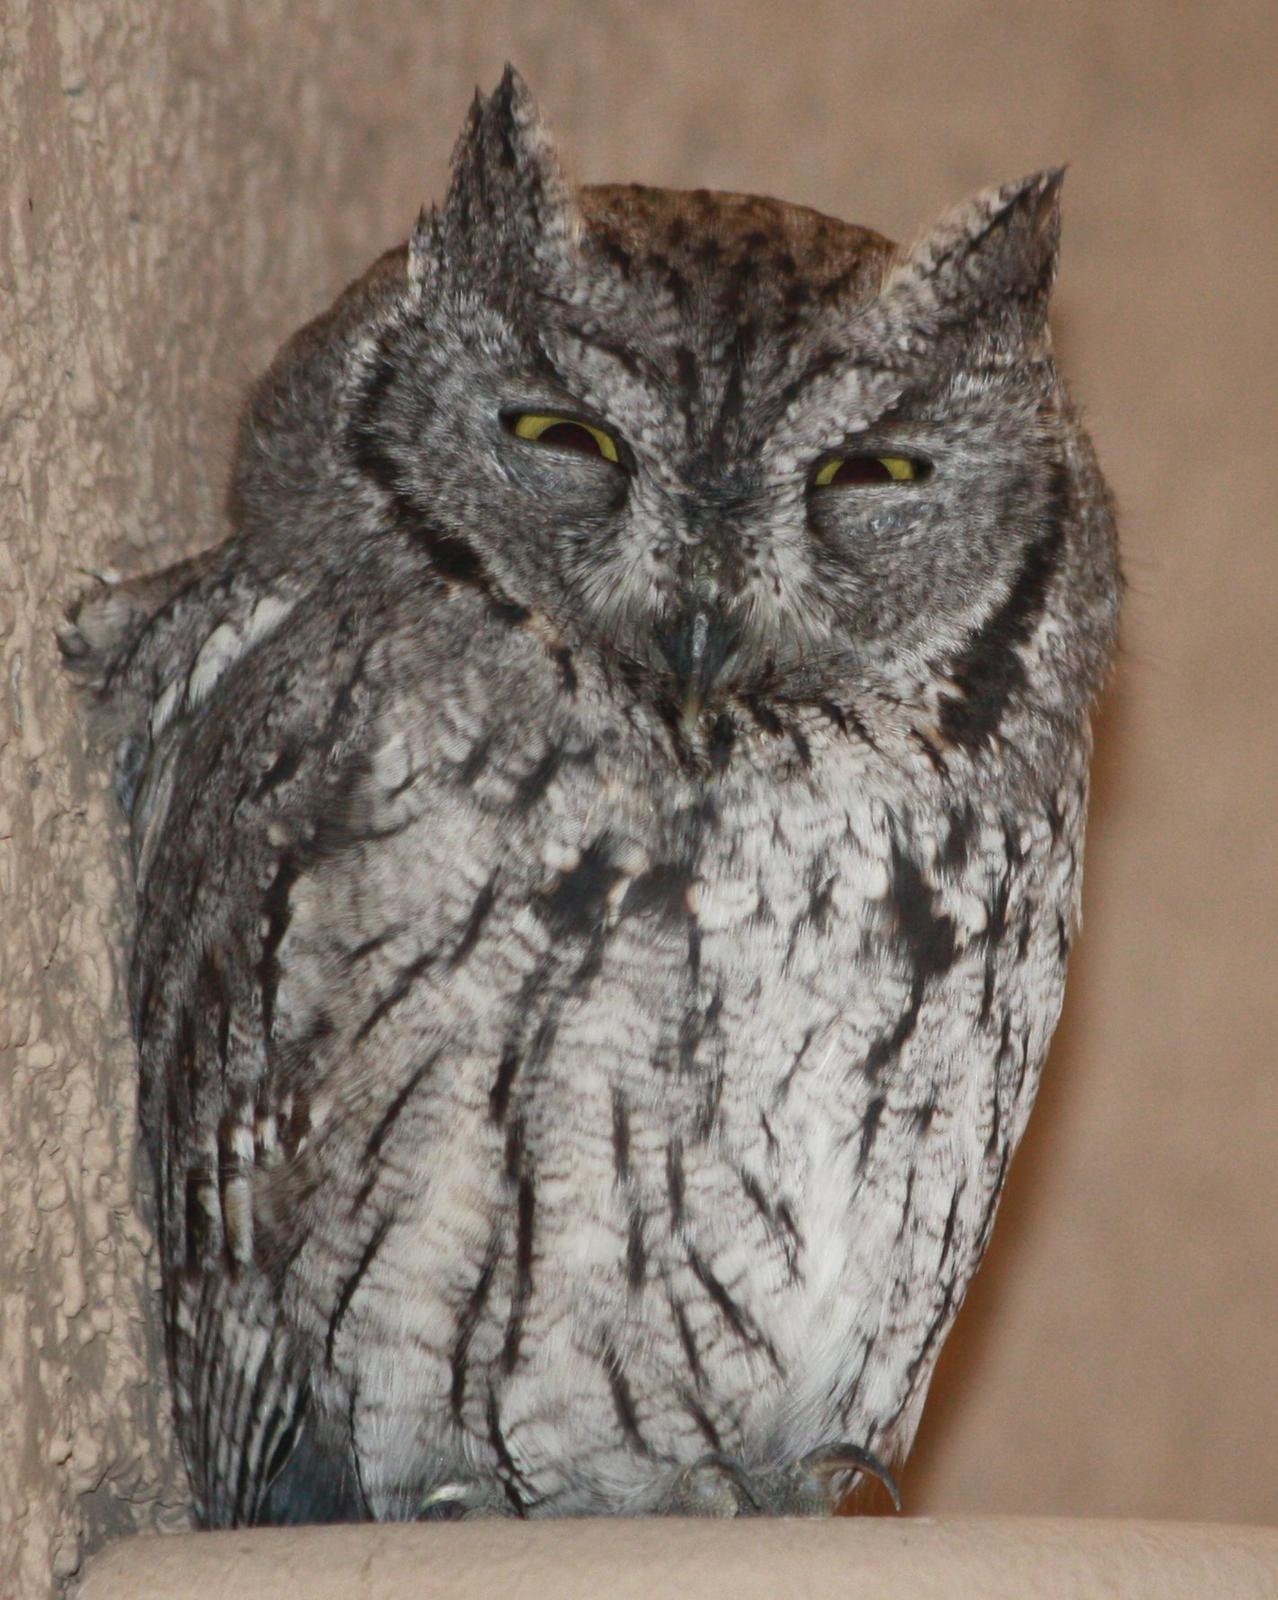 Western Screech-Owl Photo by Andrew Core